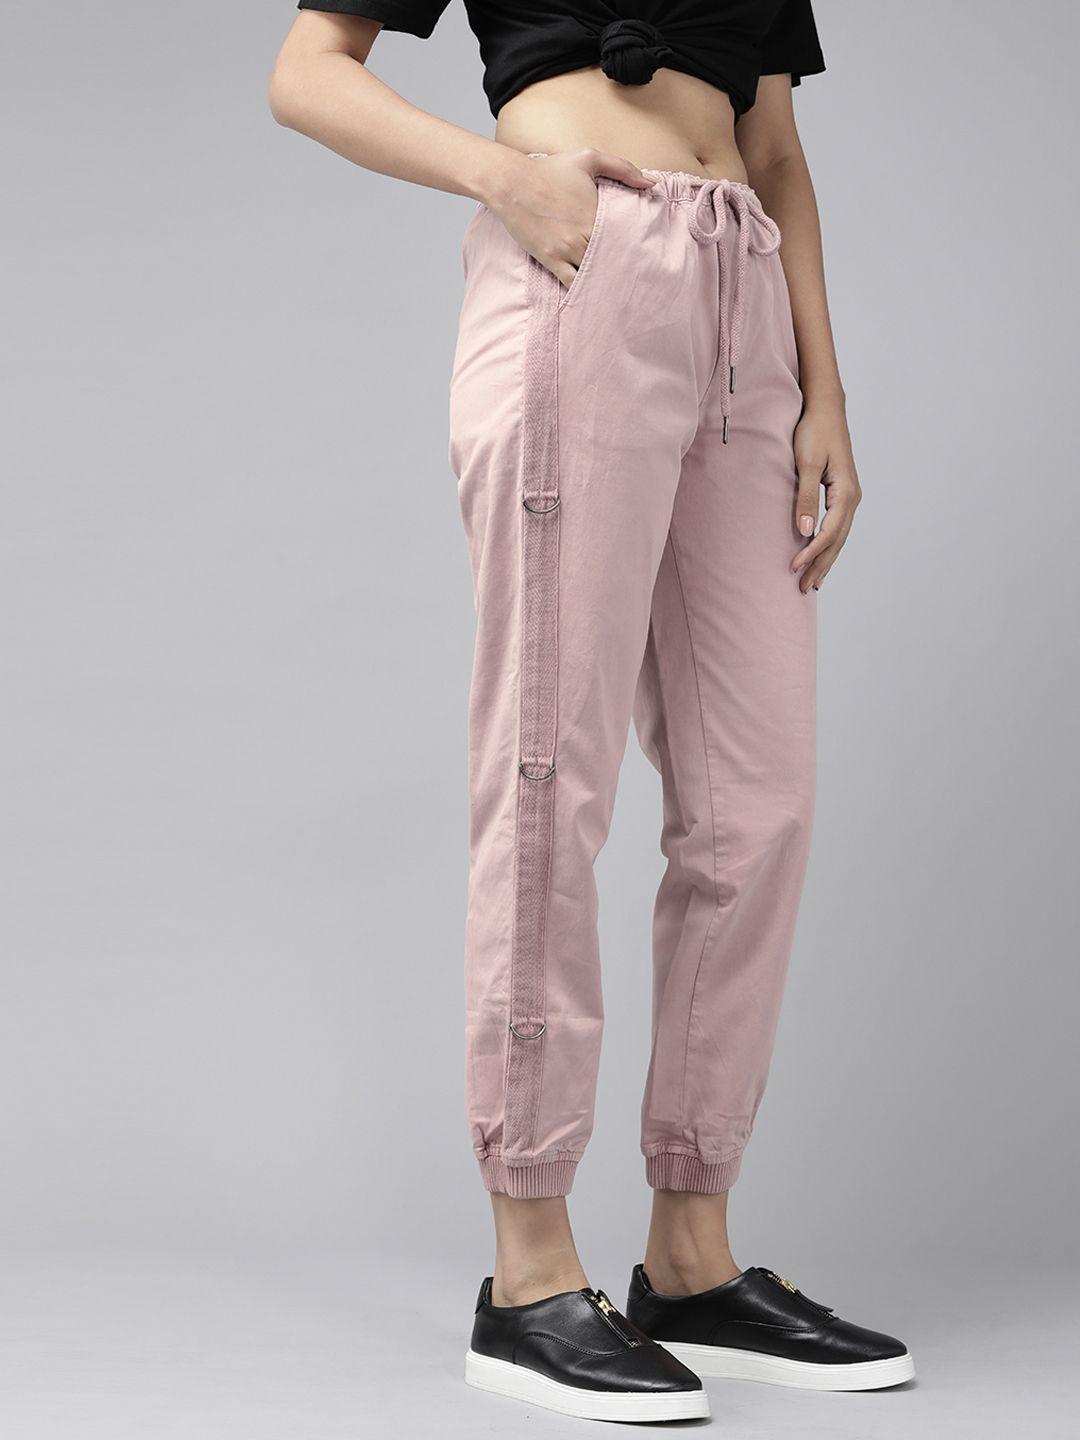 the roadster lifestyle co women pink solid jogger trousers